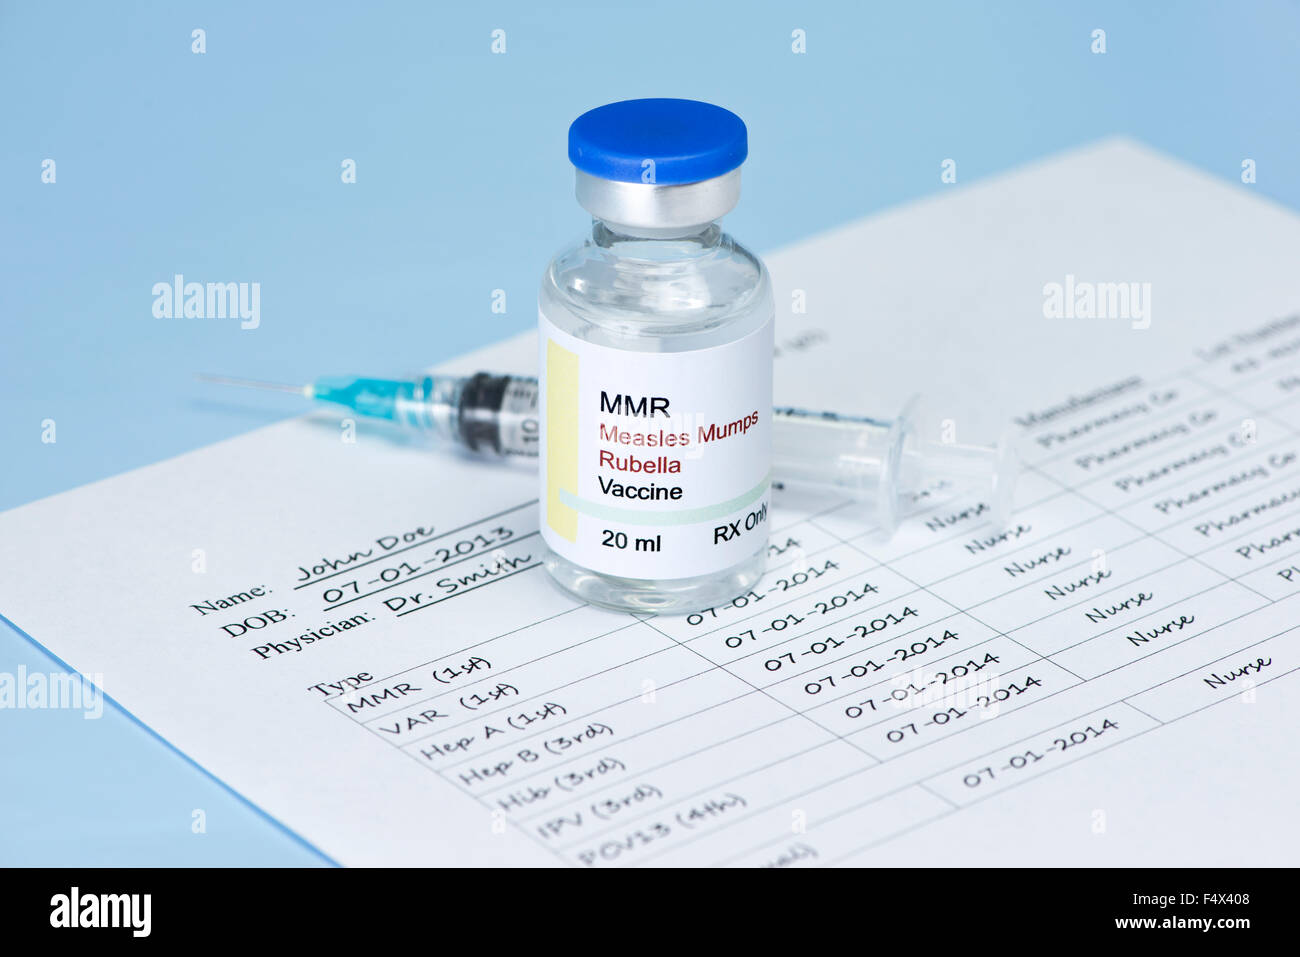 Measles, mumps, rubella virus vaccine and patient immunization record.   Label and record are fictitious, and any resemblance to Stock Photo